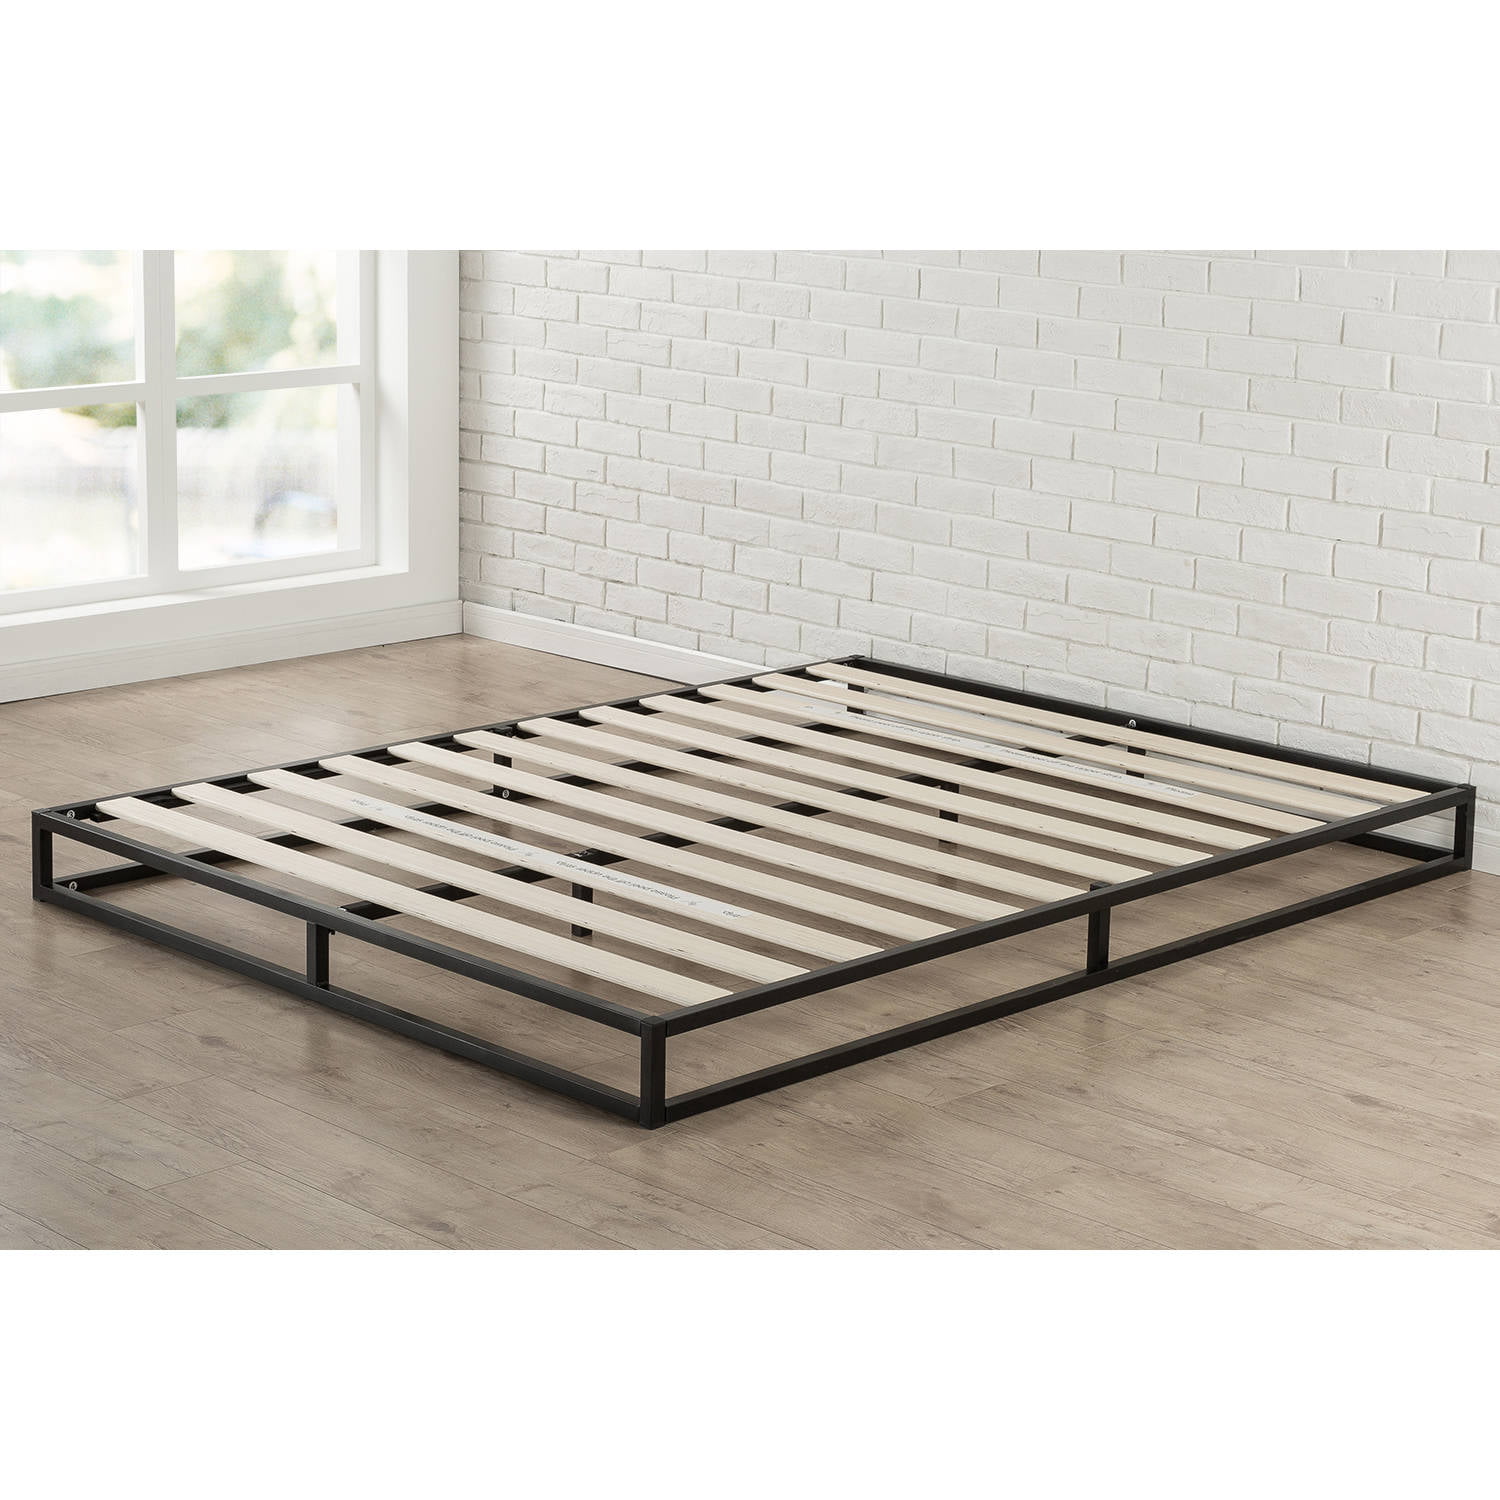 Sturdy Low Profile 10 Inch King Size Bed Frame Black Home Bedroom